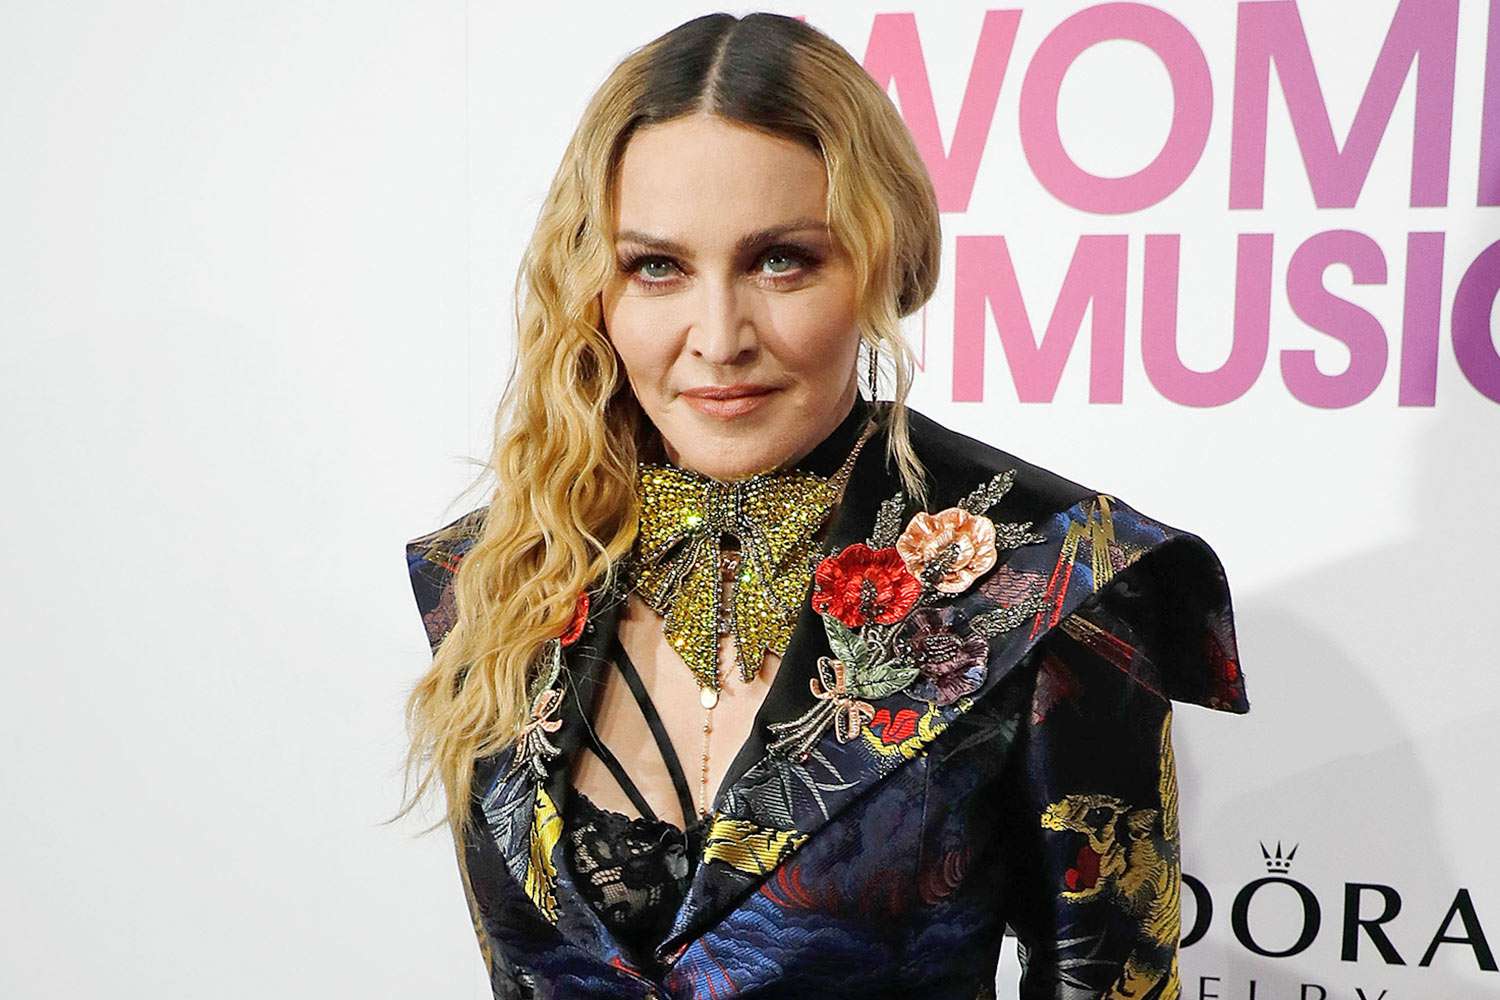 Madonna Poses for Increasingly Risqué Set of Selfies Ending with Topless Photo